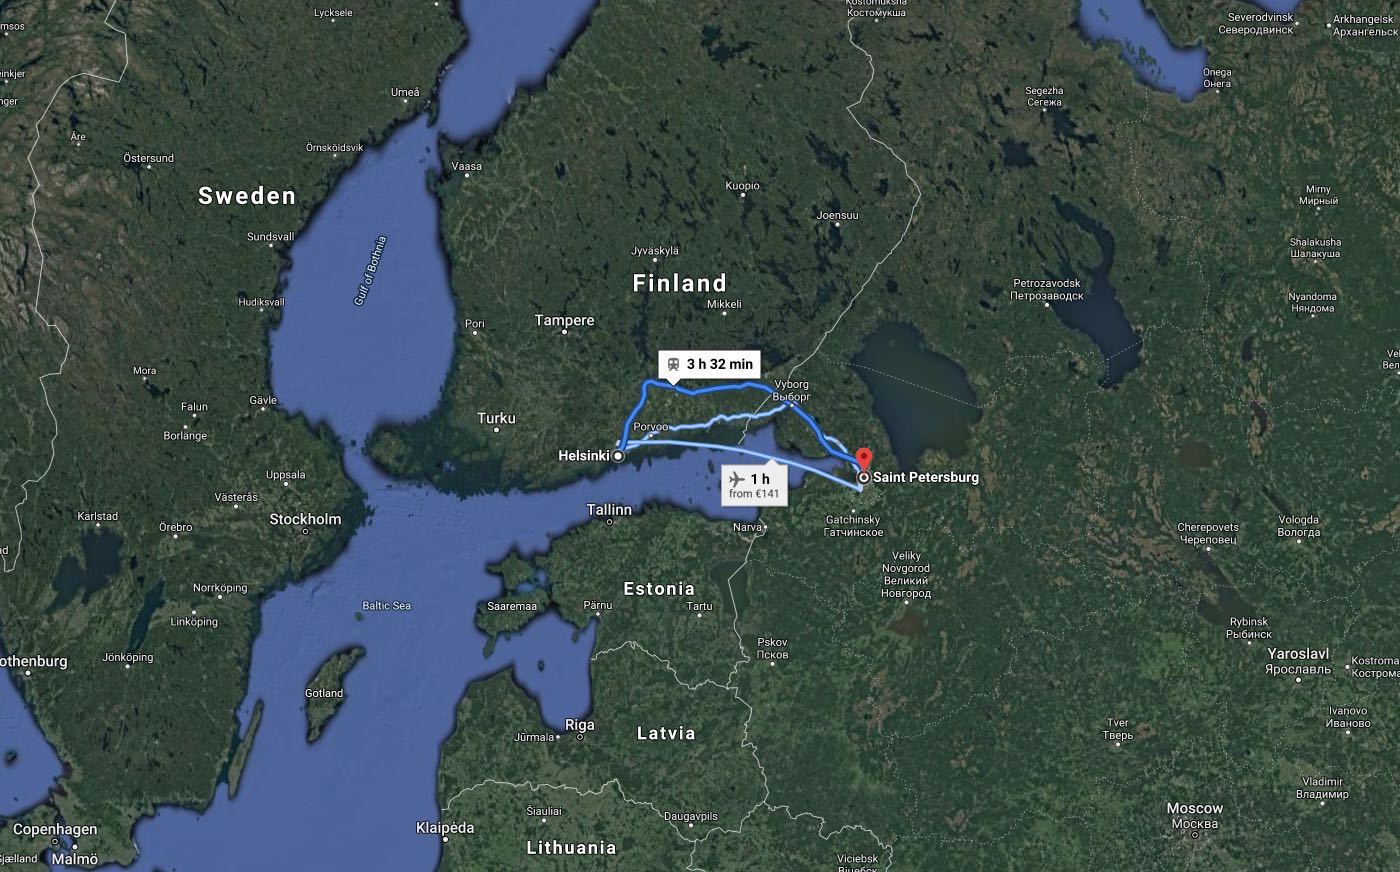 Map for going from Helsinki to St. Petersburg - Google maps